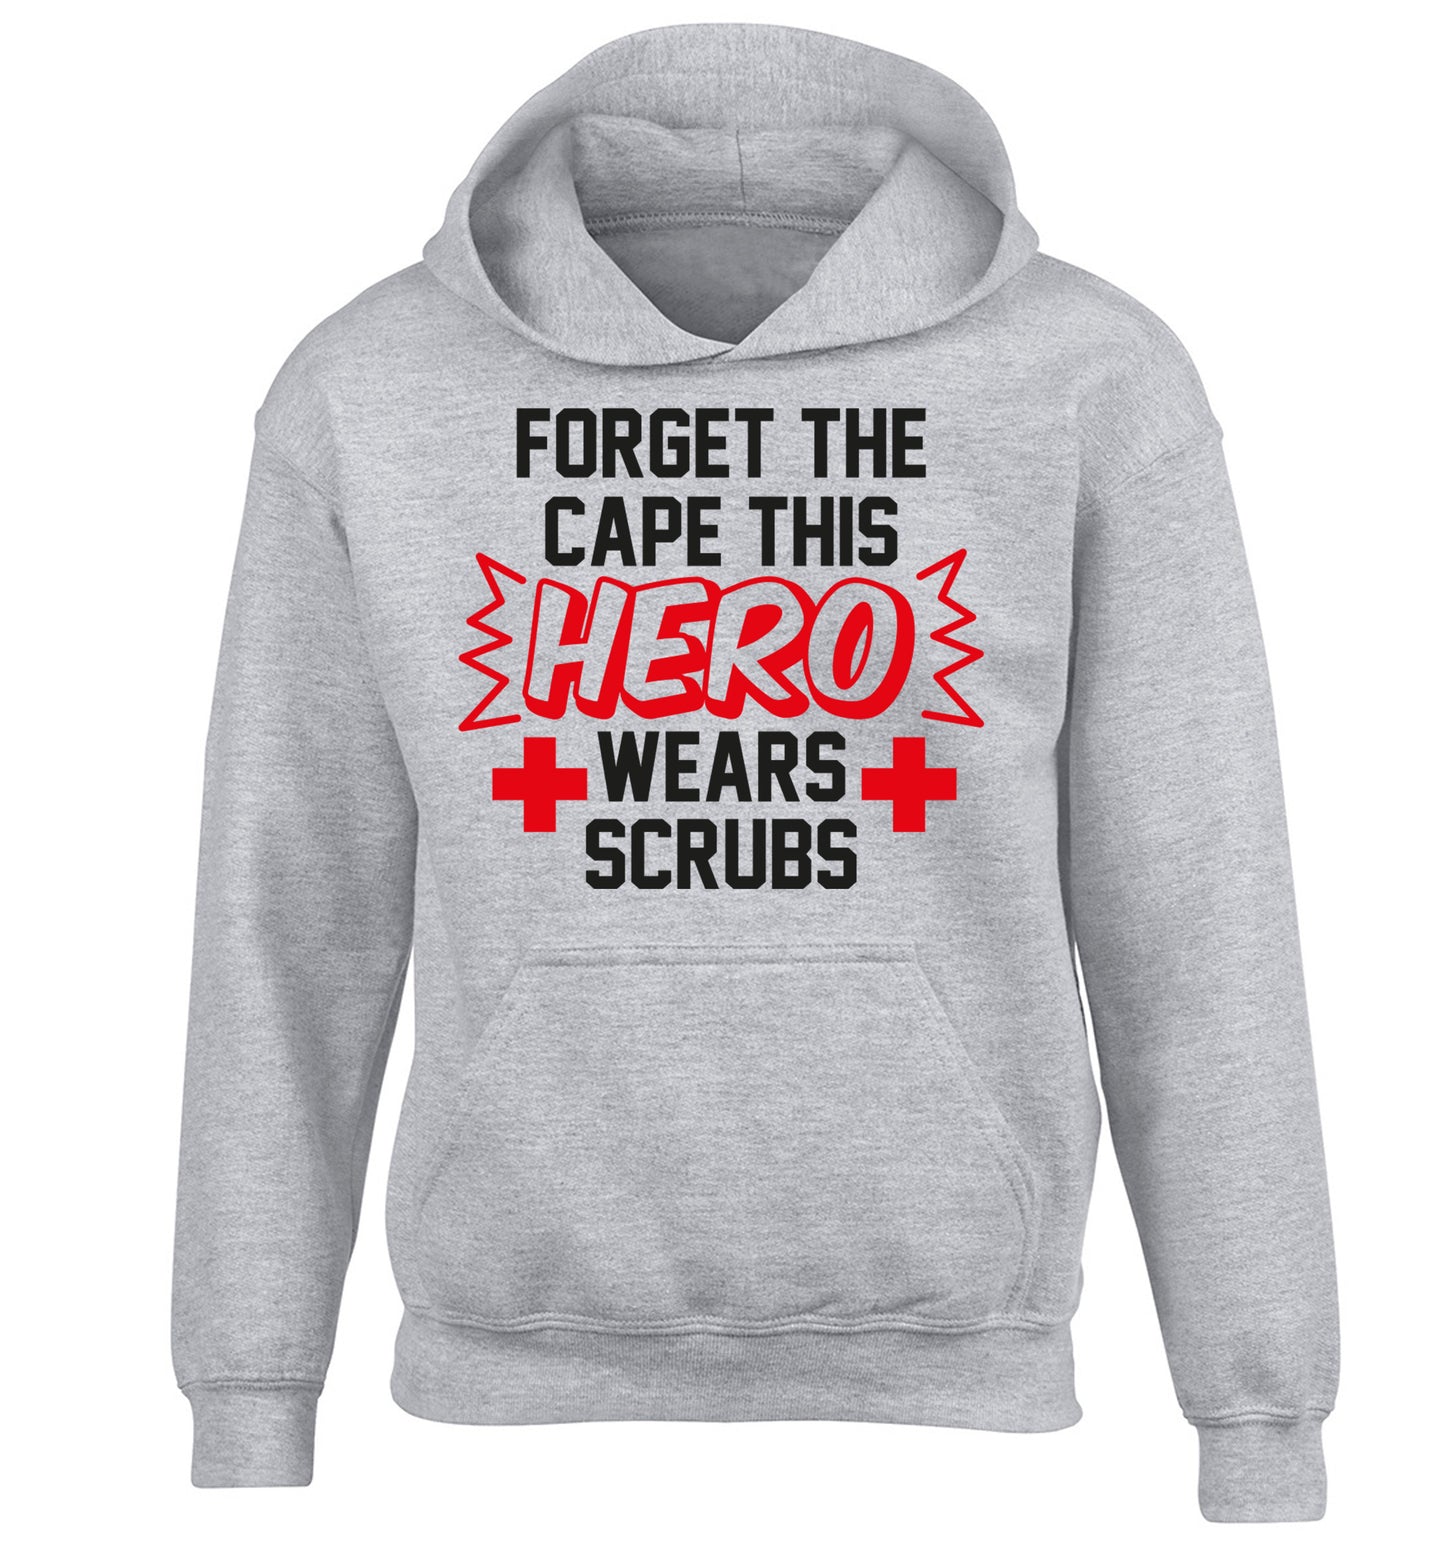 Forget the cape this hero wears scrubs children's grey hoodie 12-14 Years